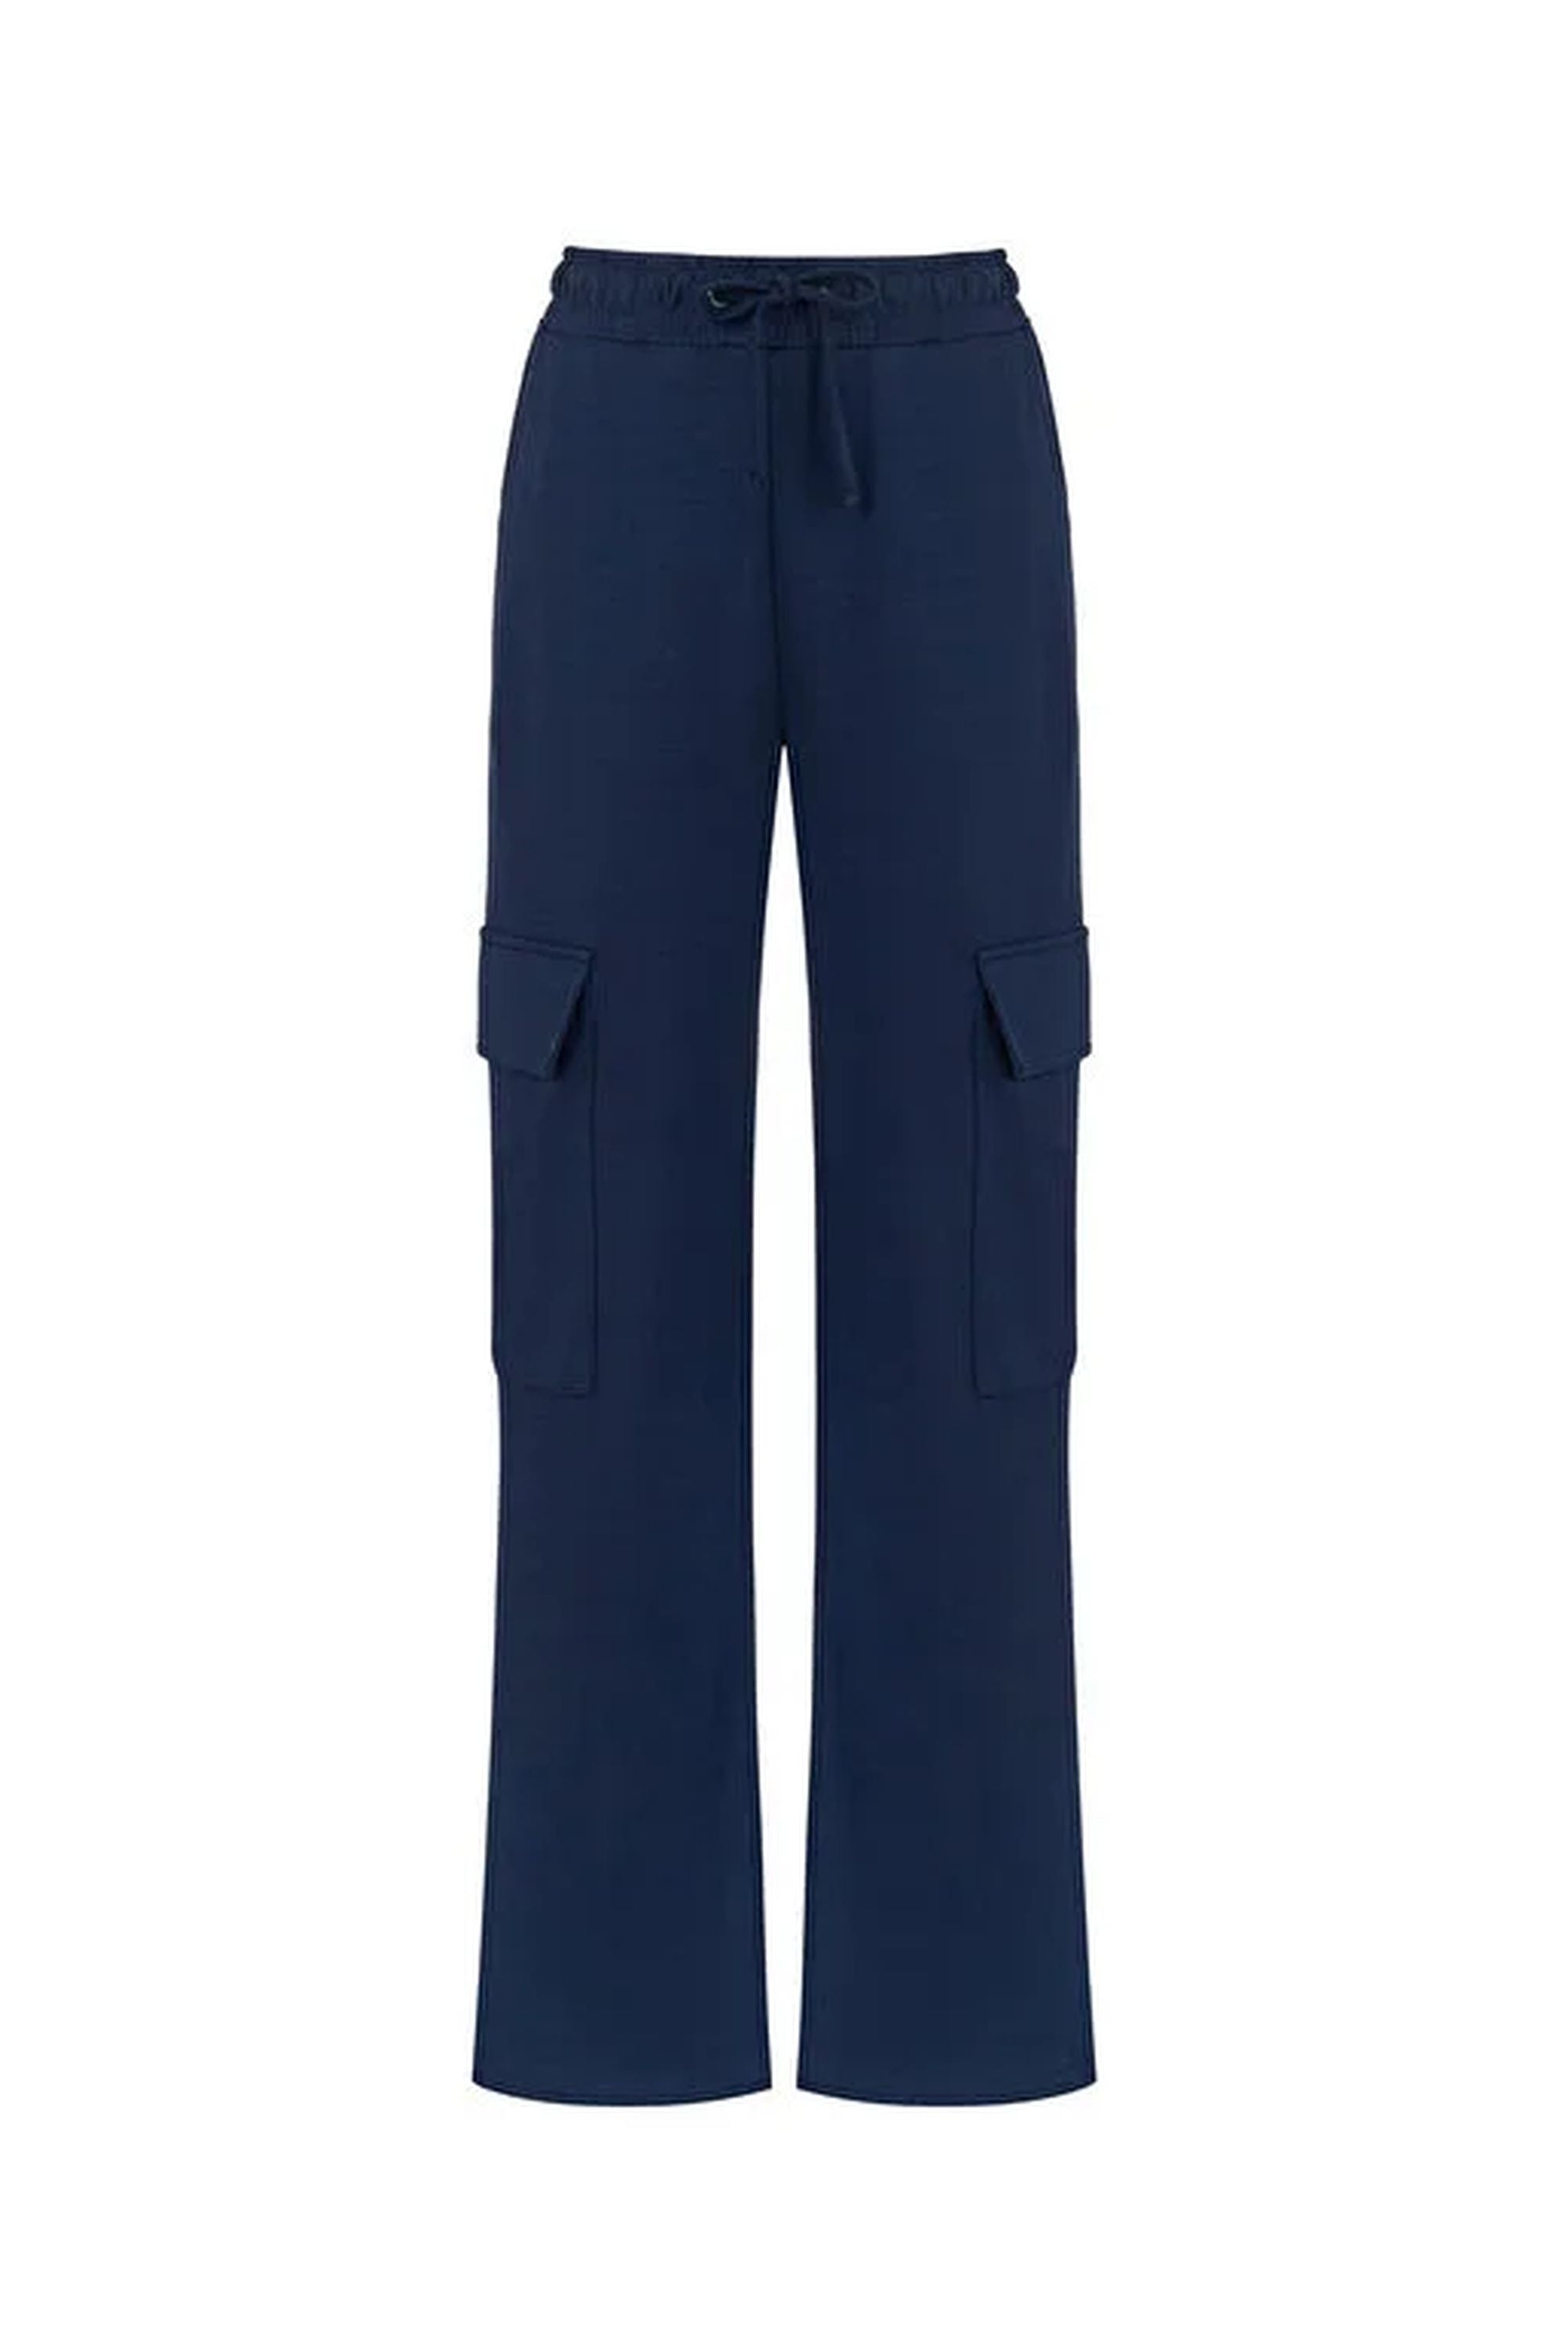 Nocturne Women's Blue Cargo Pants With Elastic Waistband-navy